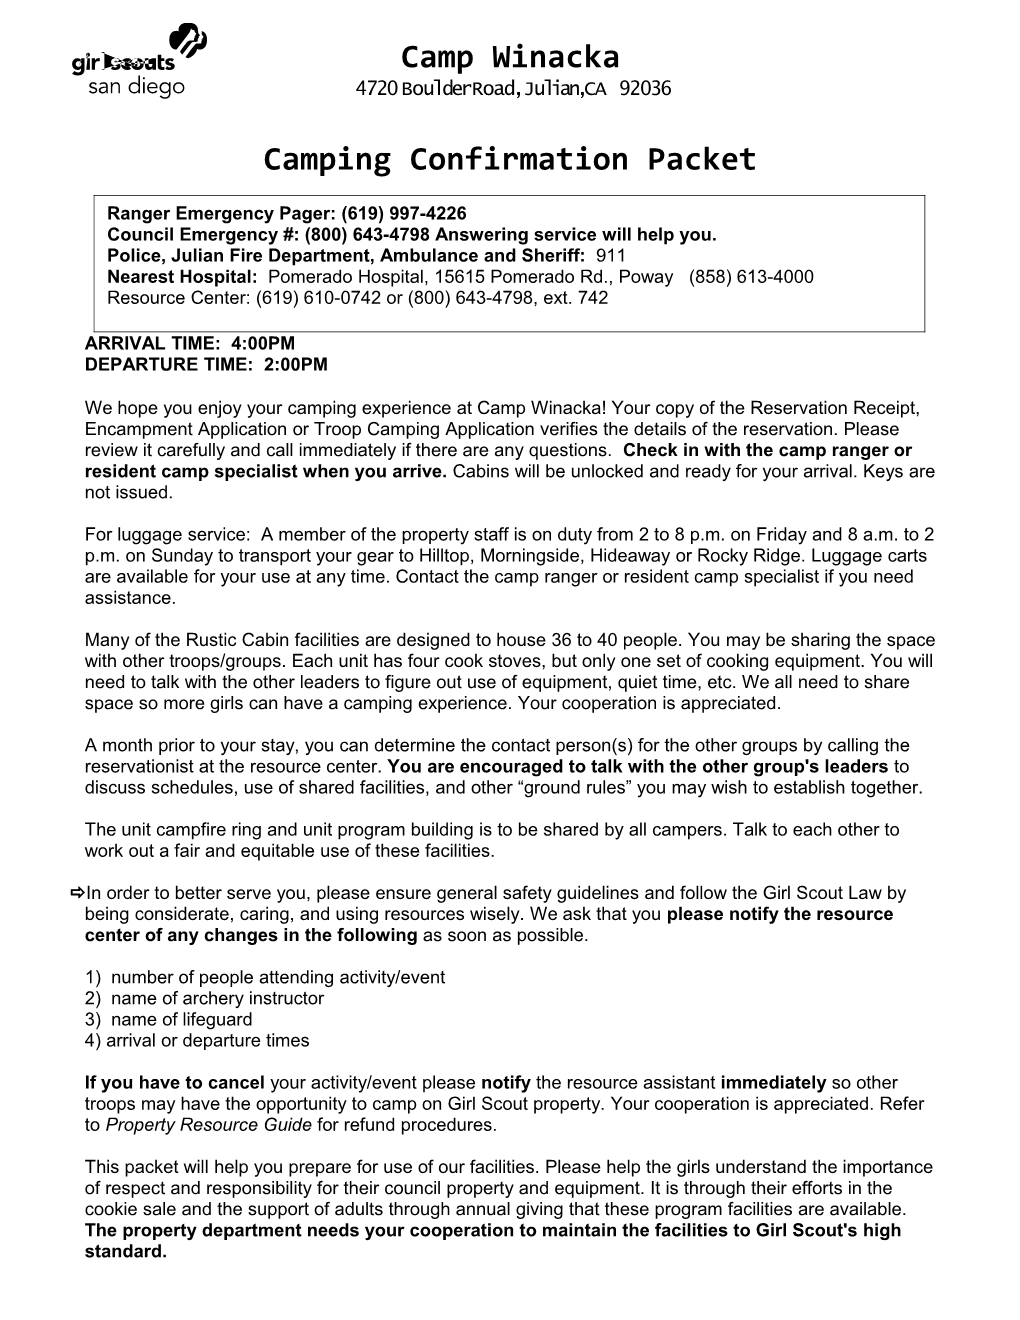 Camping Confirmation Packet